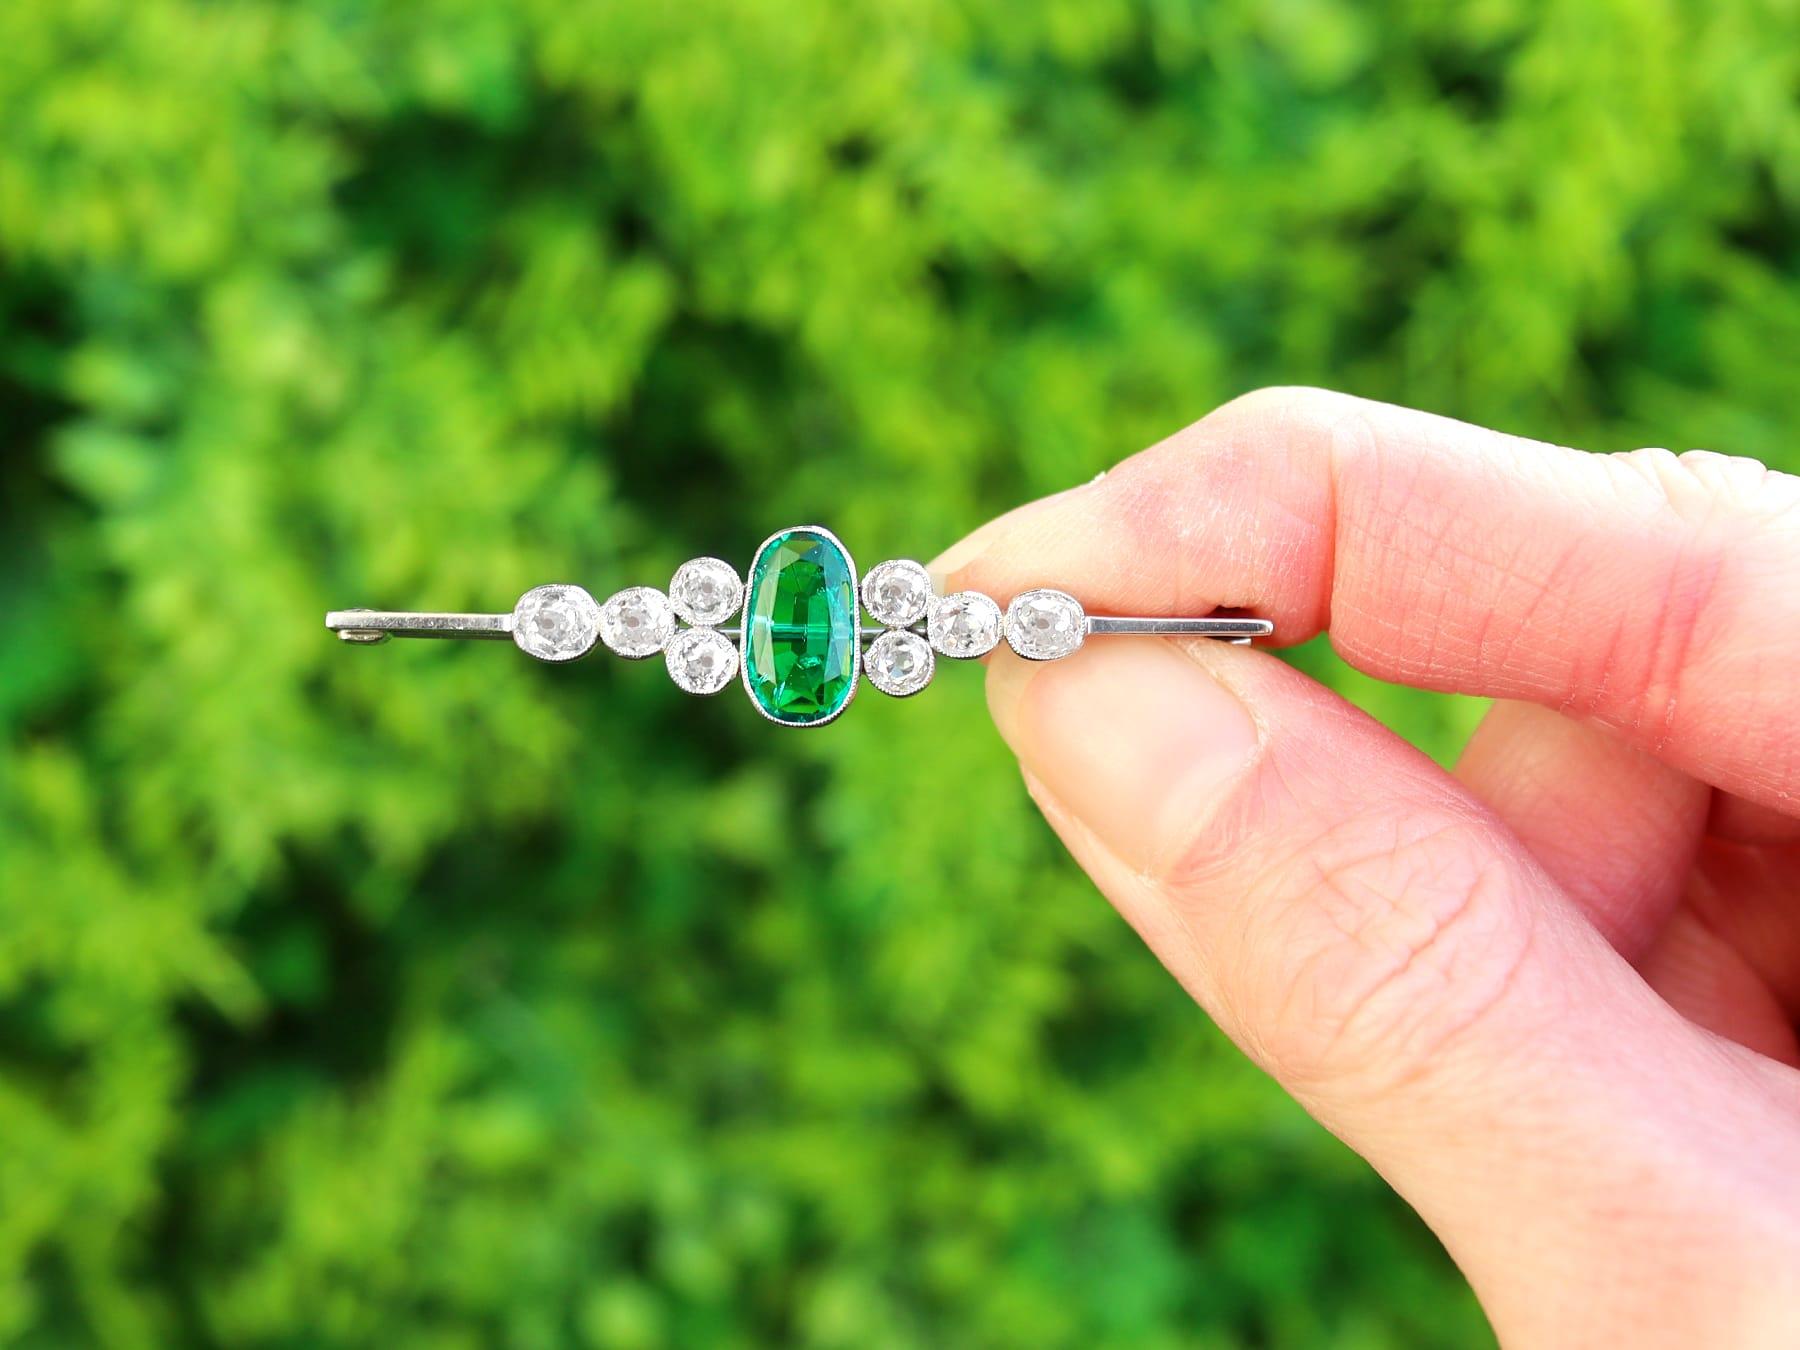 A stunning, fine and impressive 1.50 carat emerald and 2.62 carat diamond, 18 karat white gold and platinum set bar brooch; part of our diverse antique jewellery collections.

This stunning, fine and impressive Edwardian brooch has been crafted in